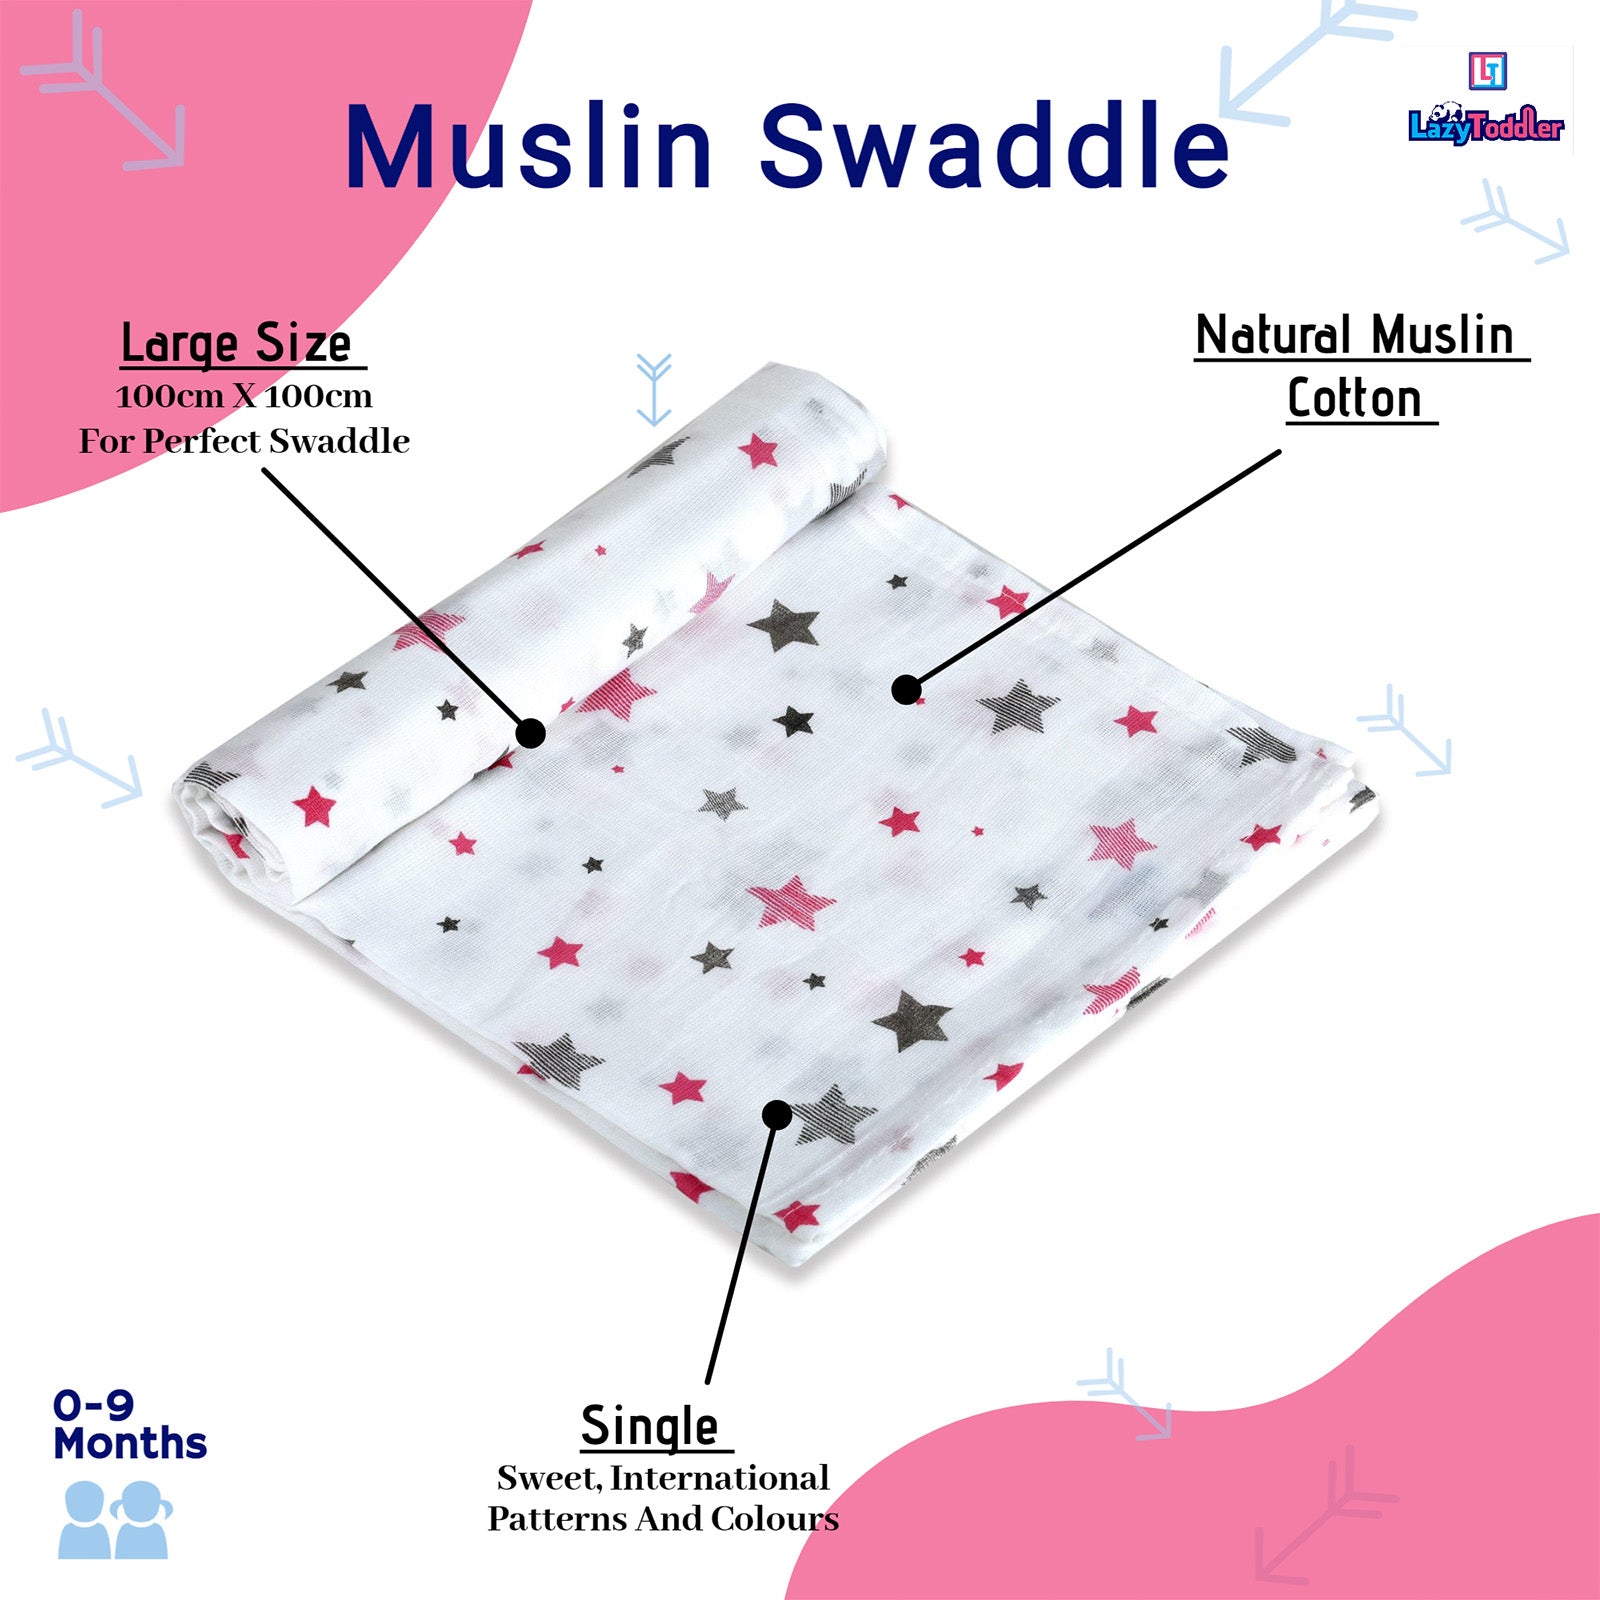 our swaddles are made up of natural muslin cotton with 100cm by 100cm size which is sufficient to wrap a new-born